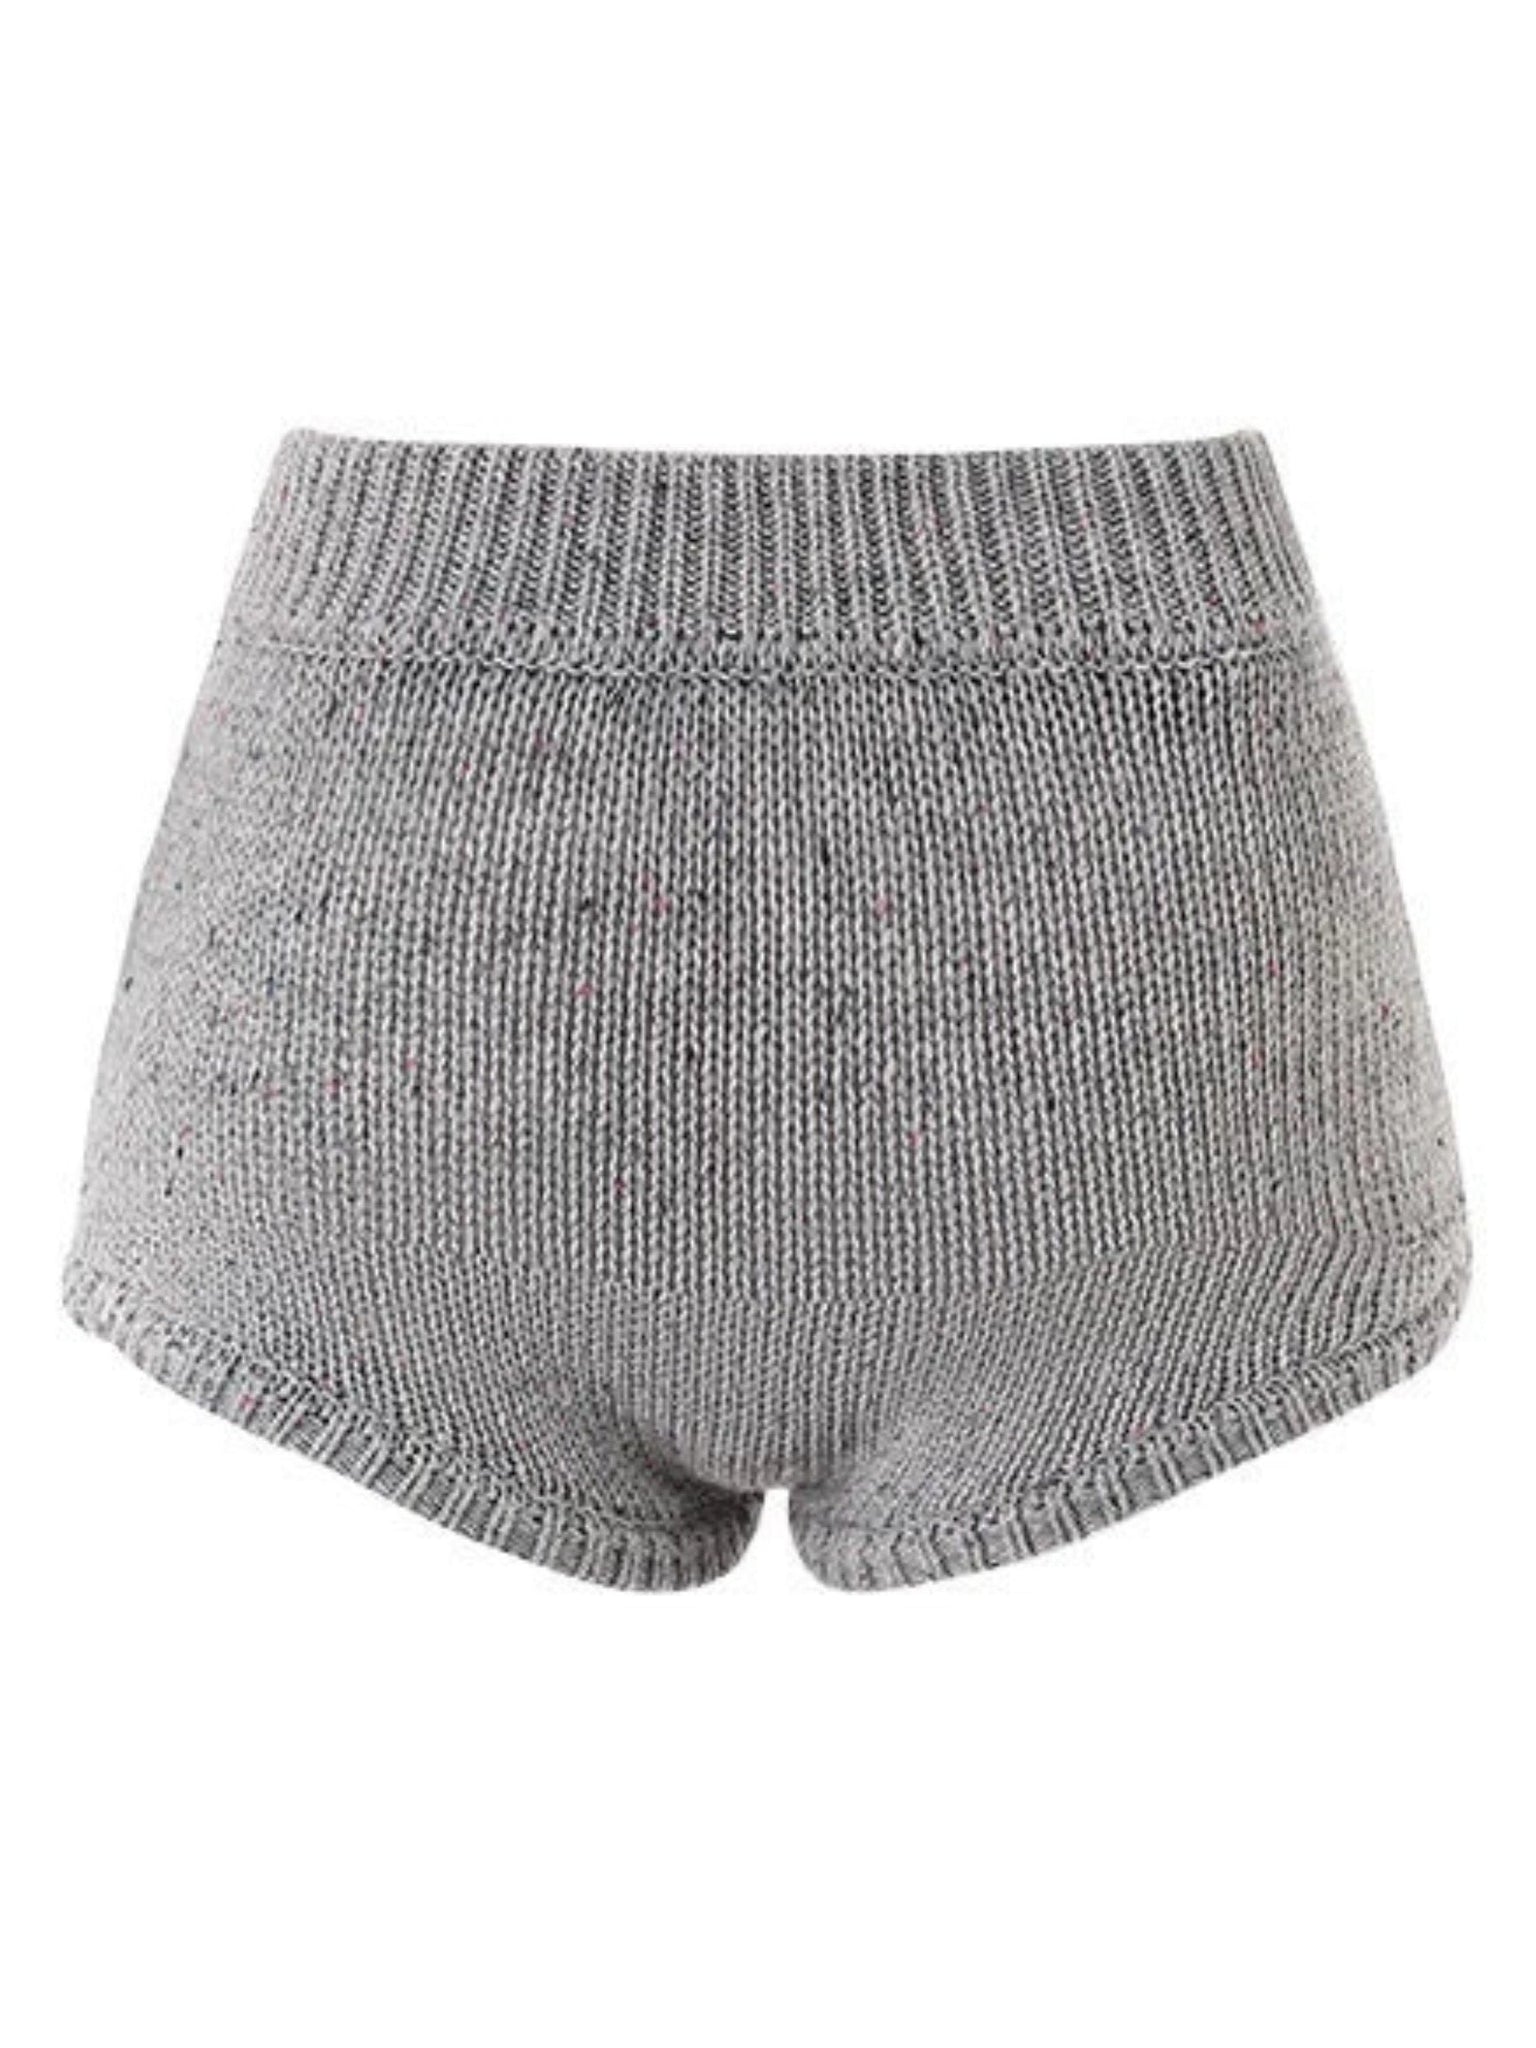 LaPose Fashion - Tomi Knit Short - Clean Girl, Fall-Winter 23, Knitted Short, Shorts, Winter Edit